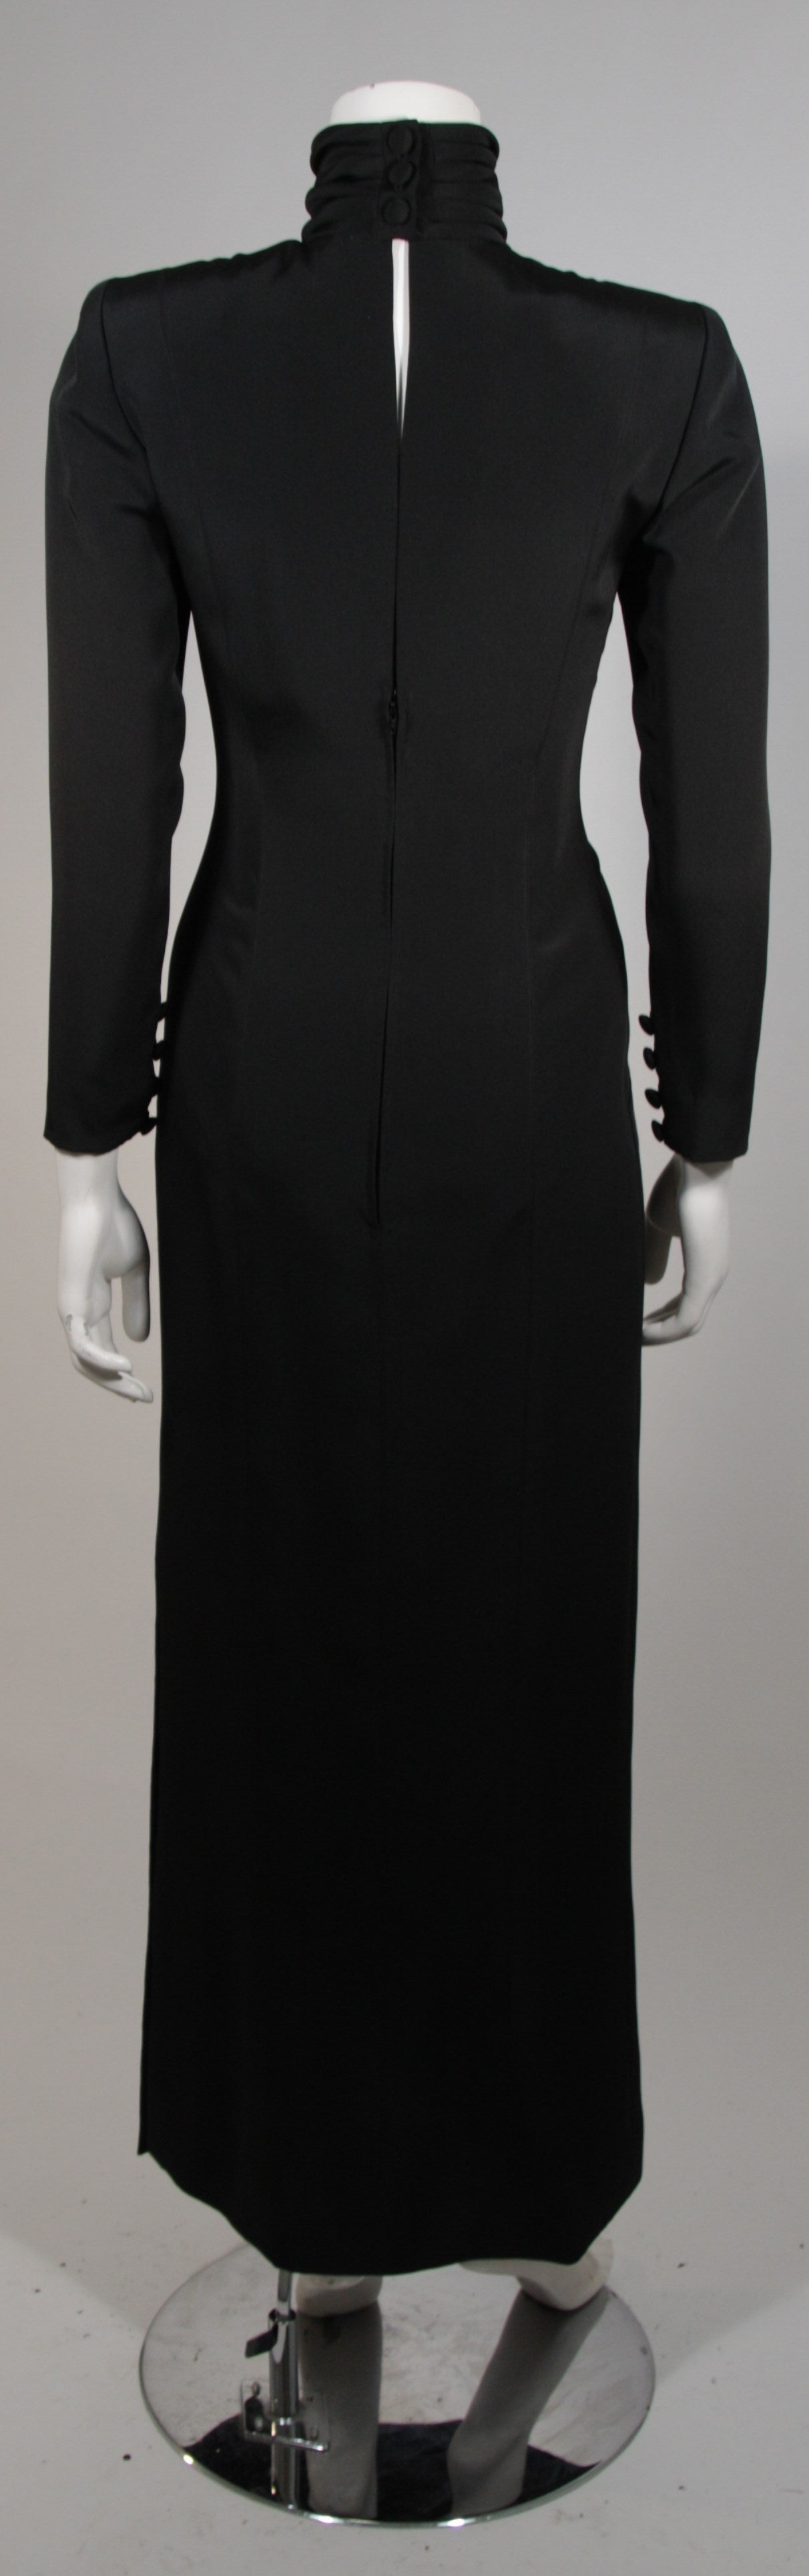 Chanel Haute Couture Black Silk Military Inspired Long Sleeve Gown Size 2-4 3